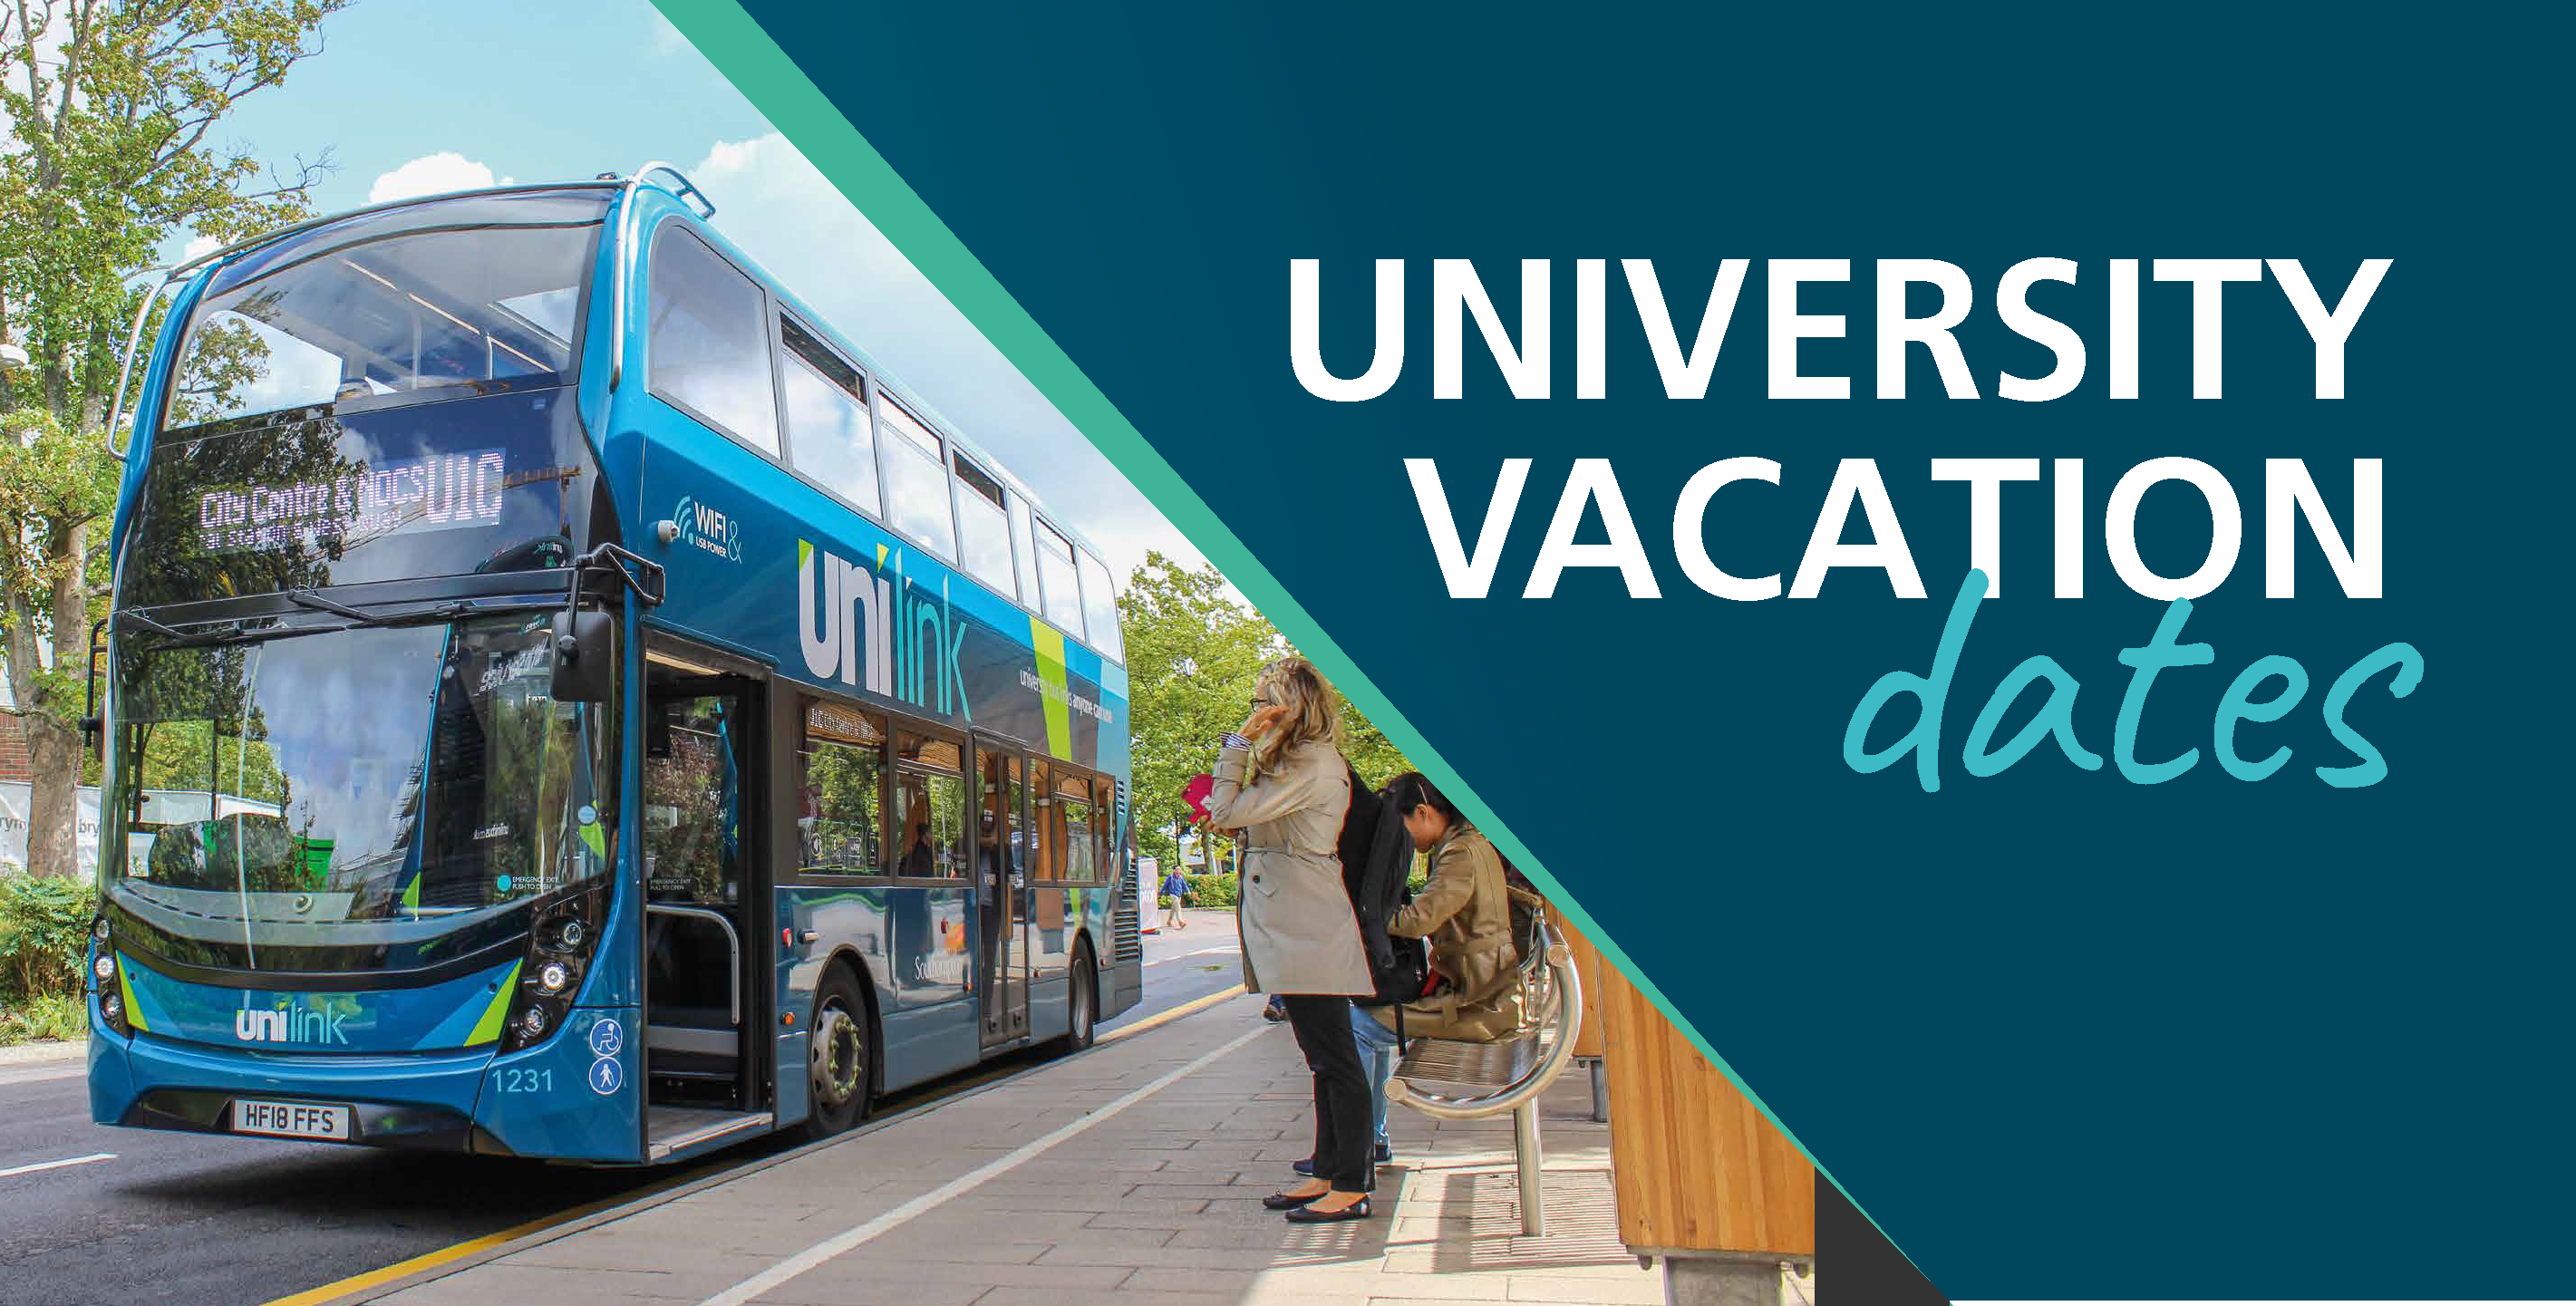 A promotional image for university term and vacation dates